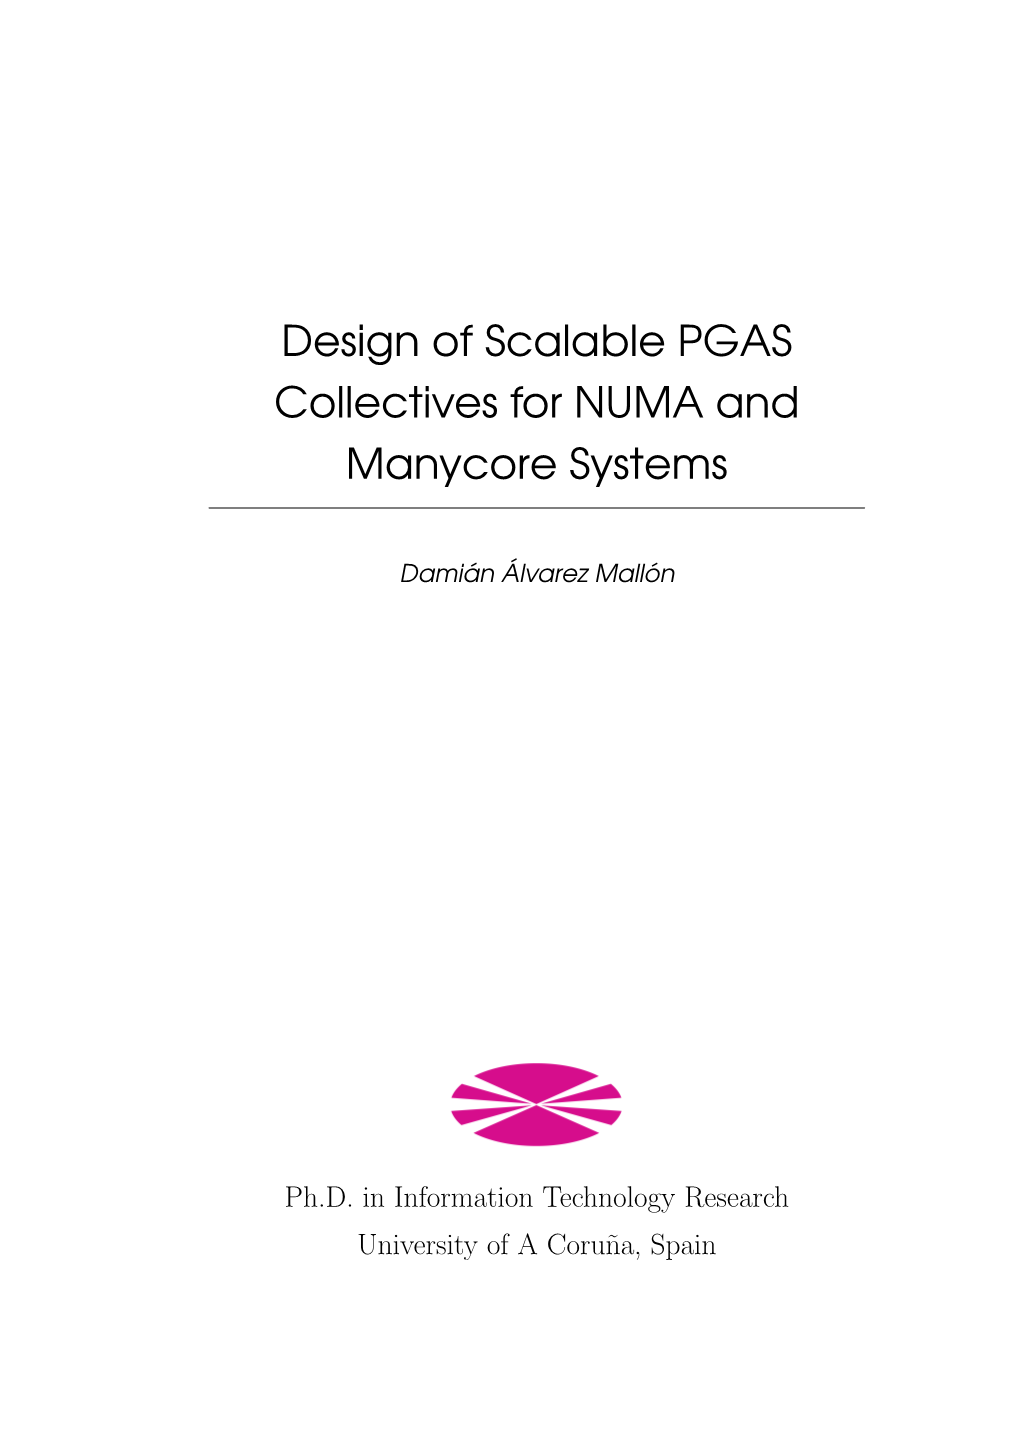 Design of Scalable PGAS Collectives for NUMA and Manycore Systems